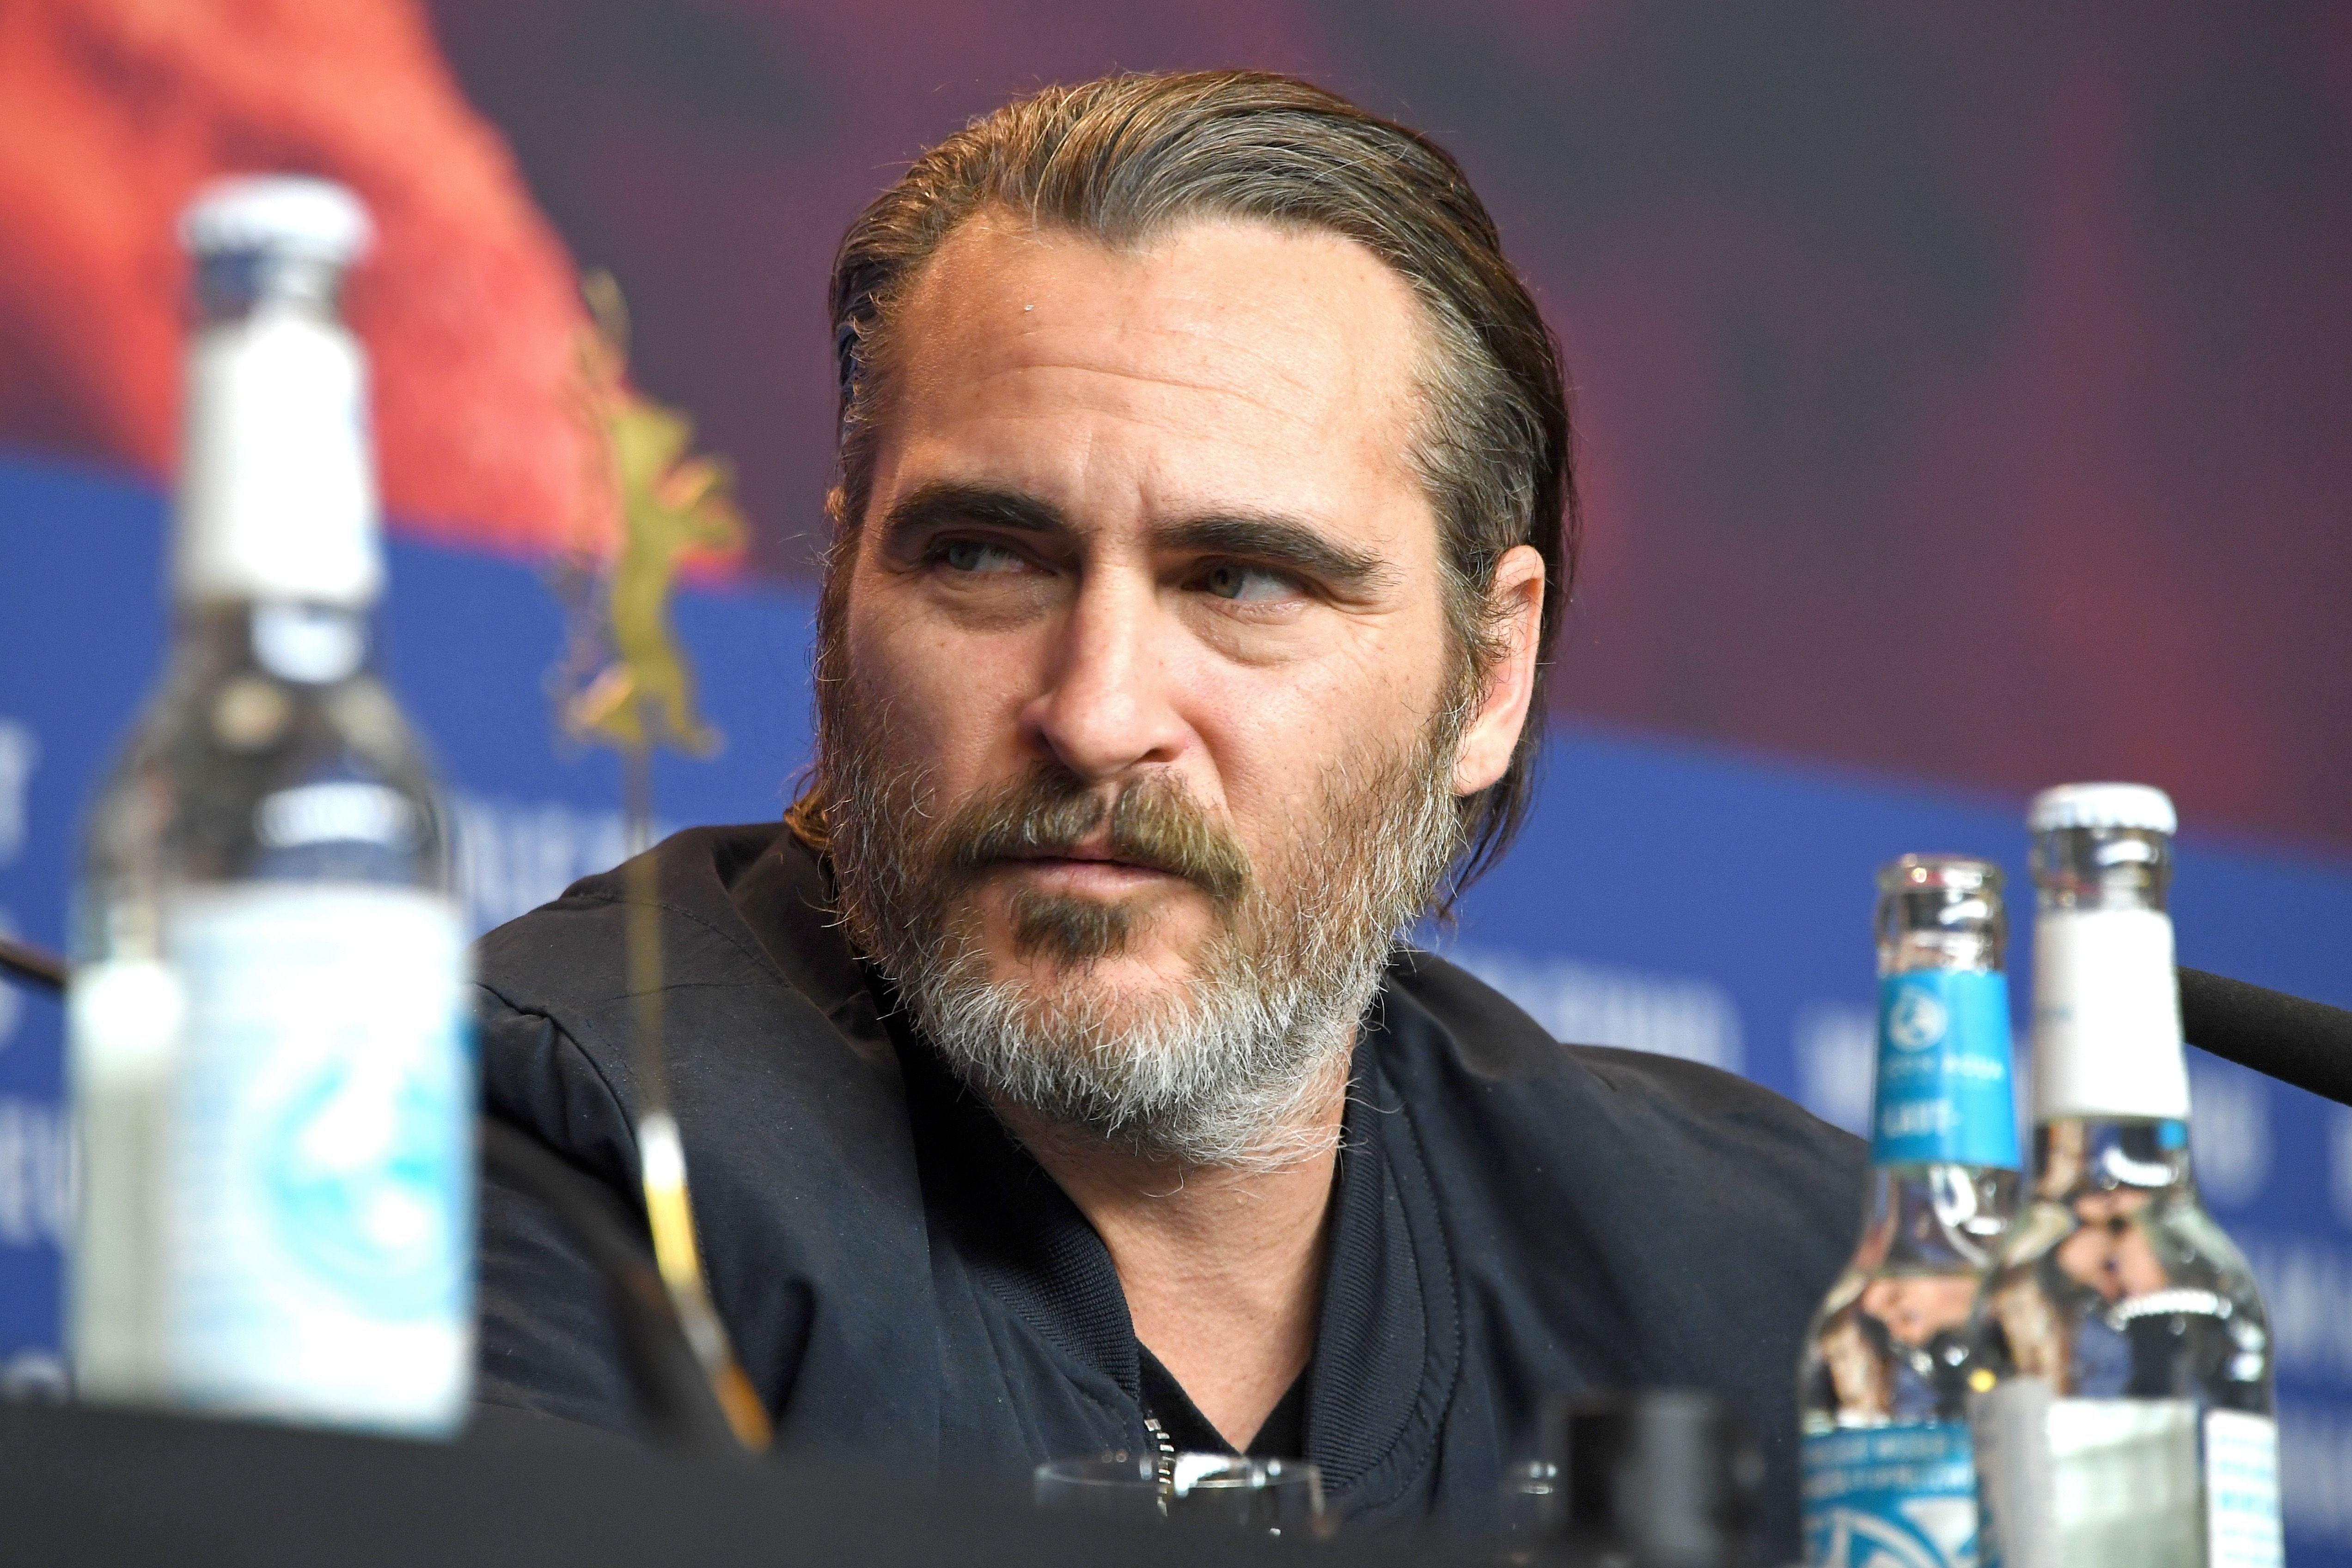 BERLIN, GERMANY - FEBRUARY 20: Joaquin Phoenix is seen at the 'Don't Worry, He Won't Get Far on Foot' press conference during the 68th Berlinale International Film Festival Berlin at Grand Hyatt Hotel on February 20, 2018 in Berlin, Germany. | Foto von: Pascal Le Segretain/Getty Images